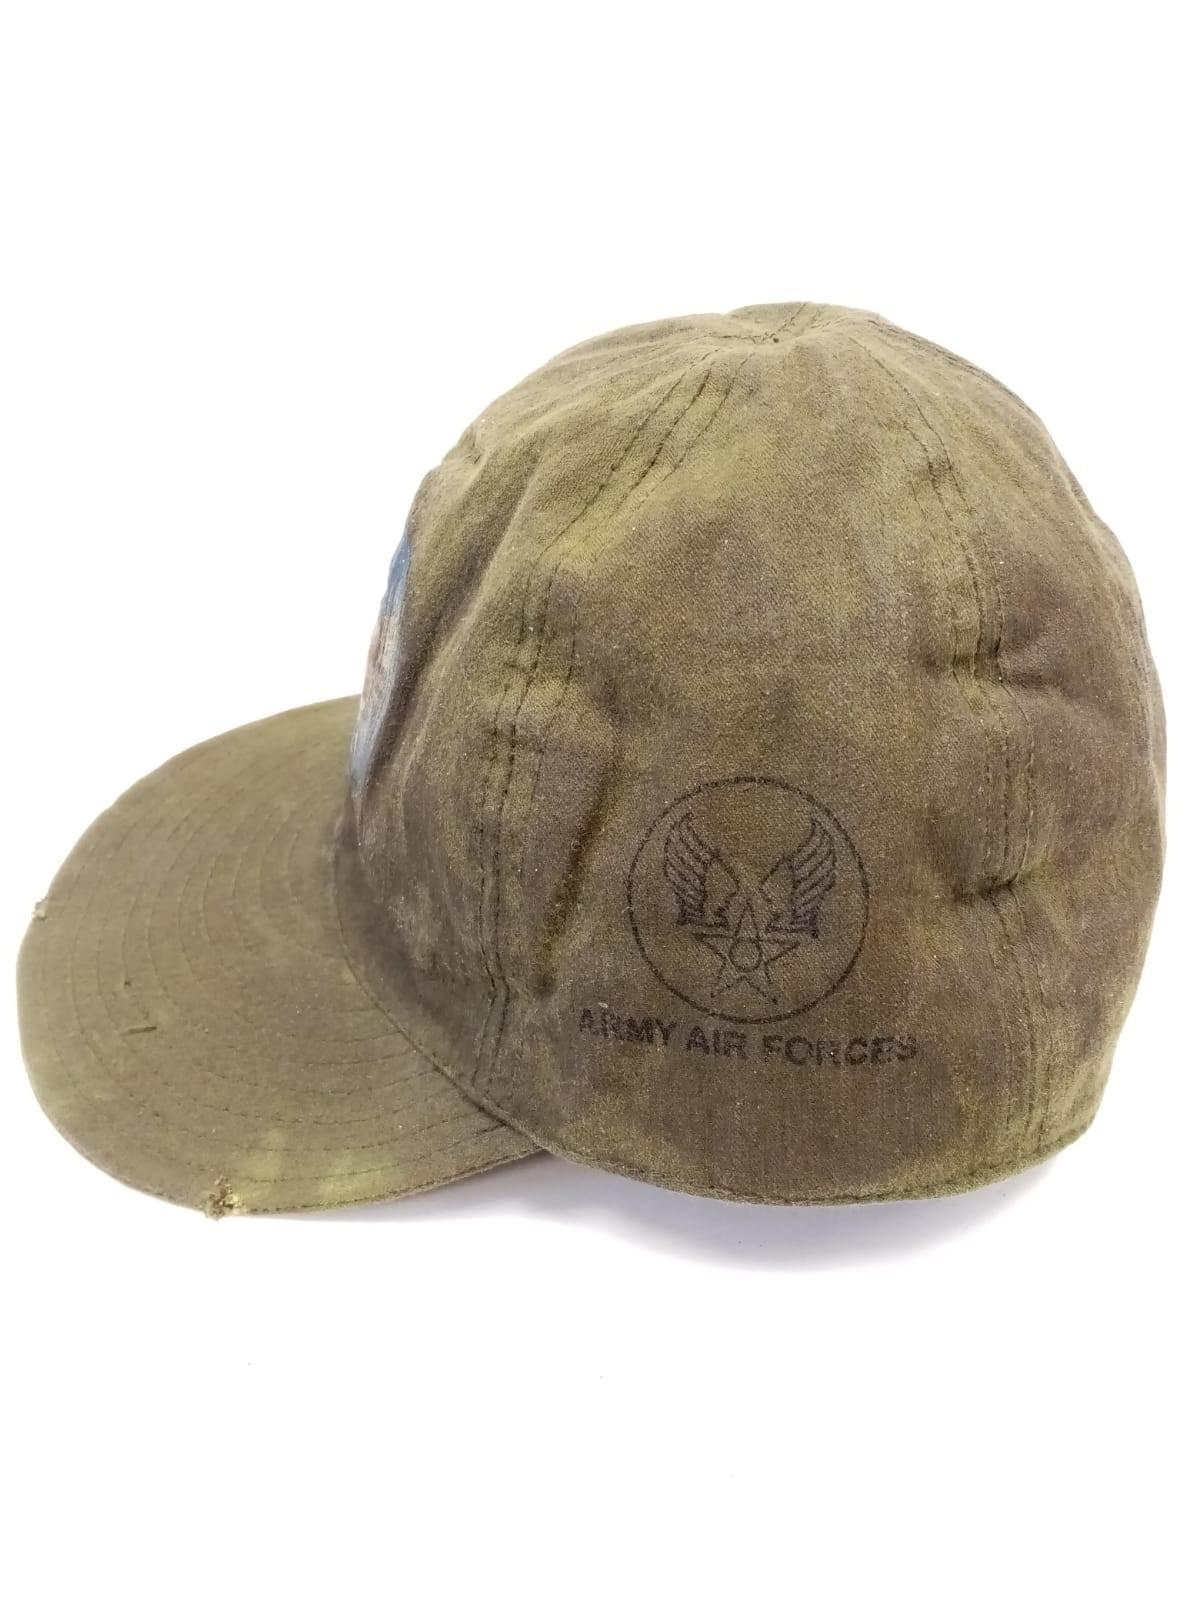 WW2 US Army Air Force mechanics cap with hand painted art - Image 2 of 5